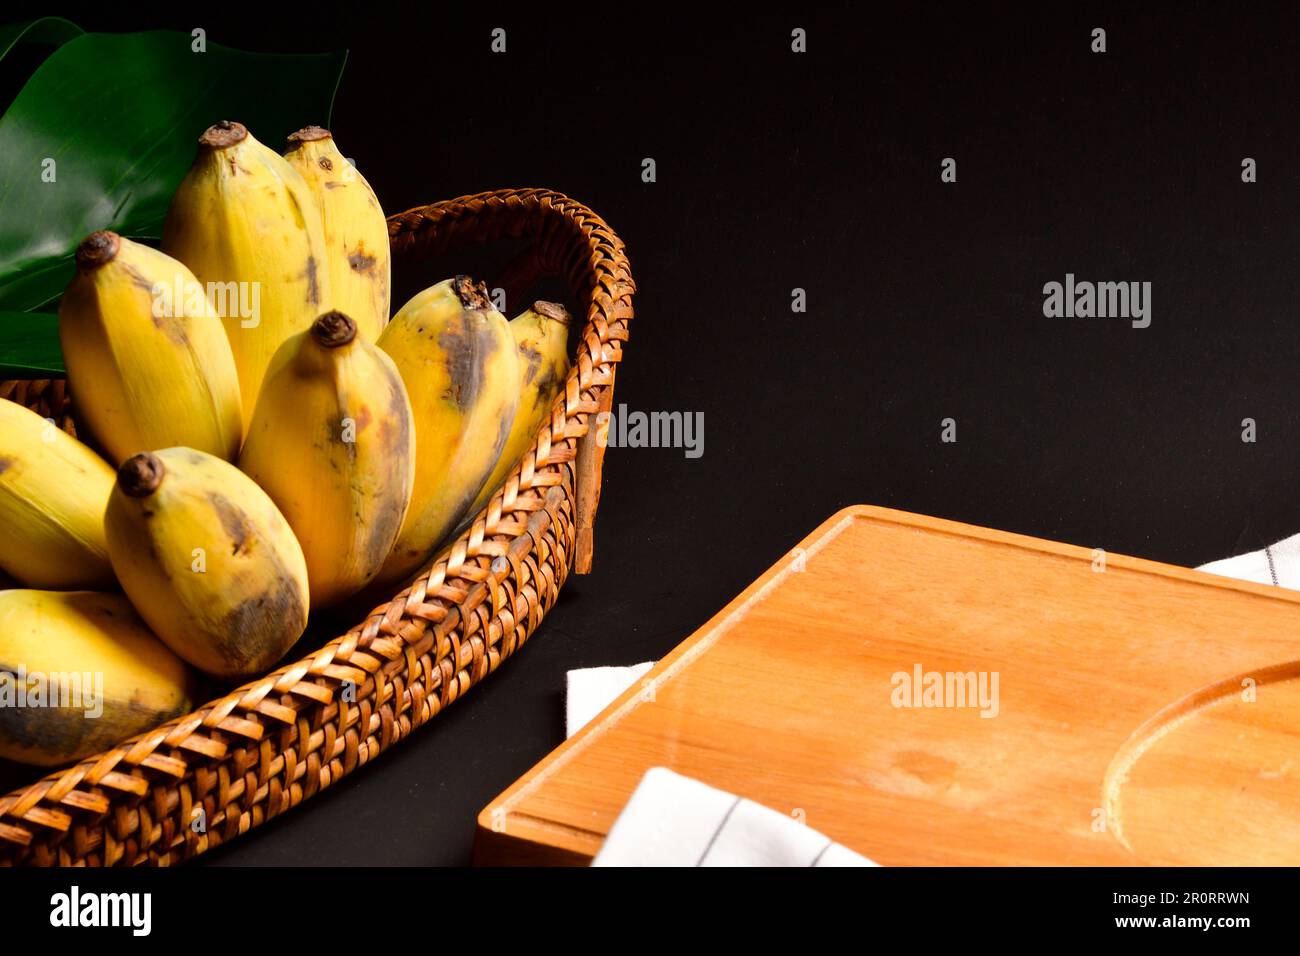 Bananas with Black background, Cultivated Banana on Black background, Thai cultivated banana.Fruits and vegetables.Copy space.Thai banana Fruit. Stock Photo